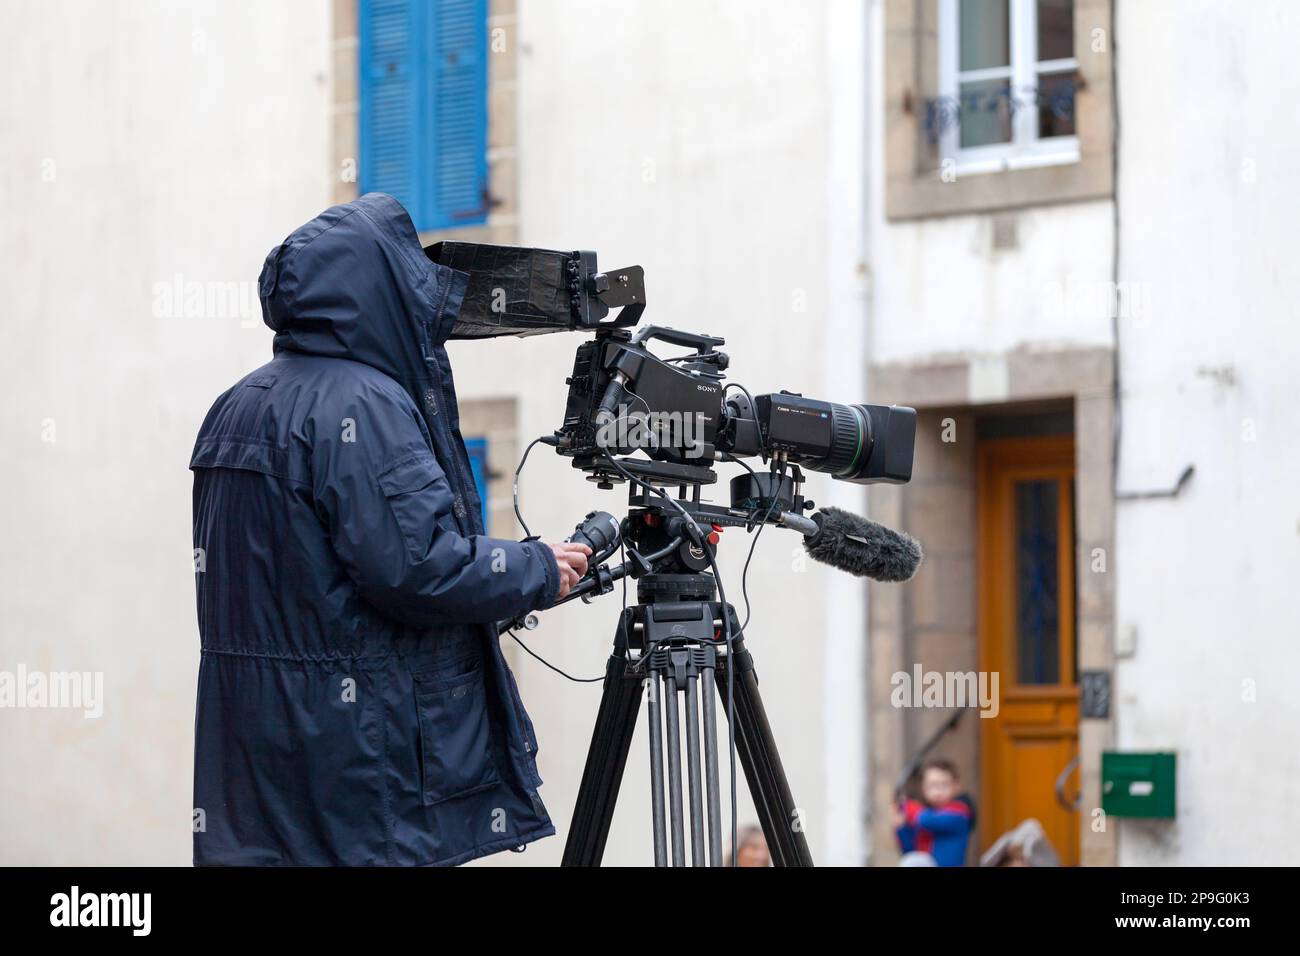 Douarnenez, France - February 27 2022: Cameraman filming for a local TV channel during Les Gras de Douarnenez. Stock Photo